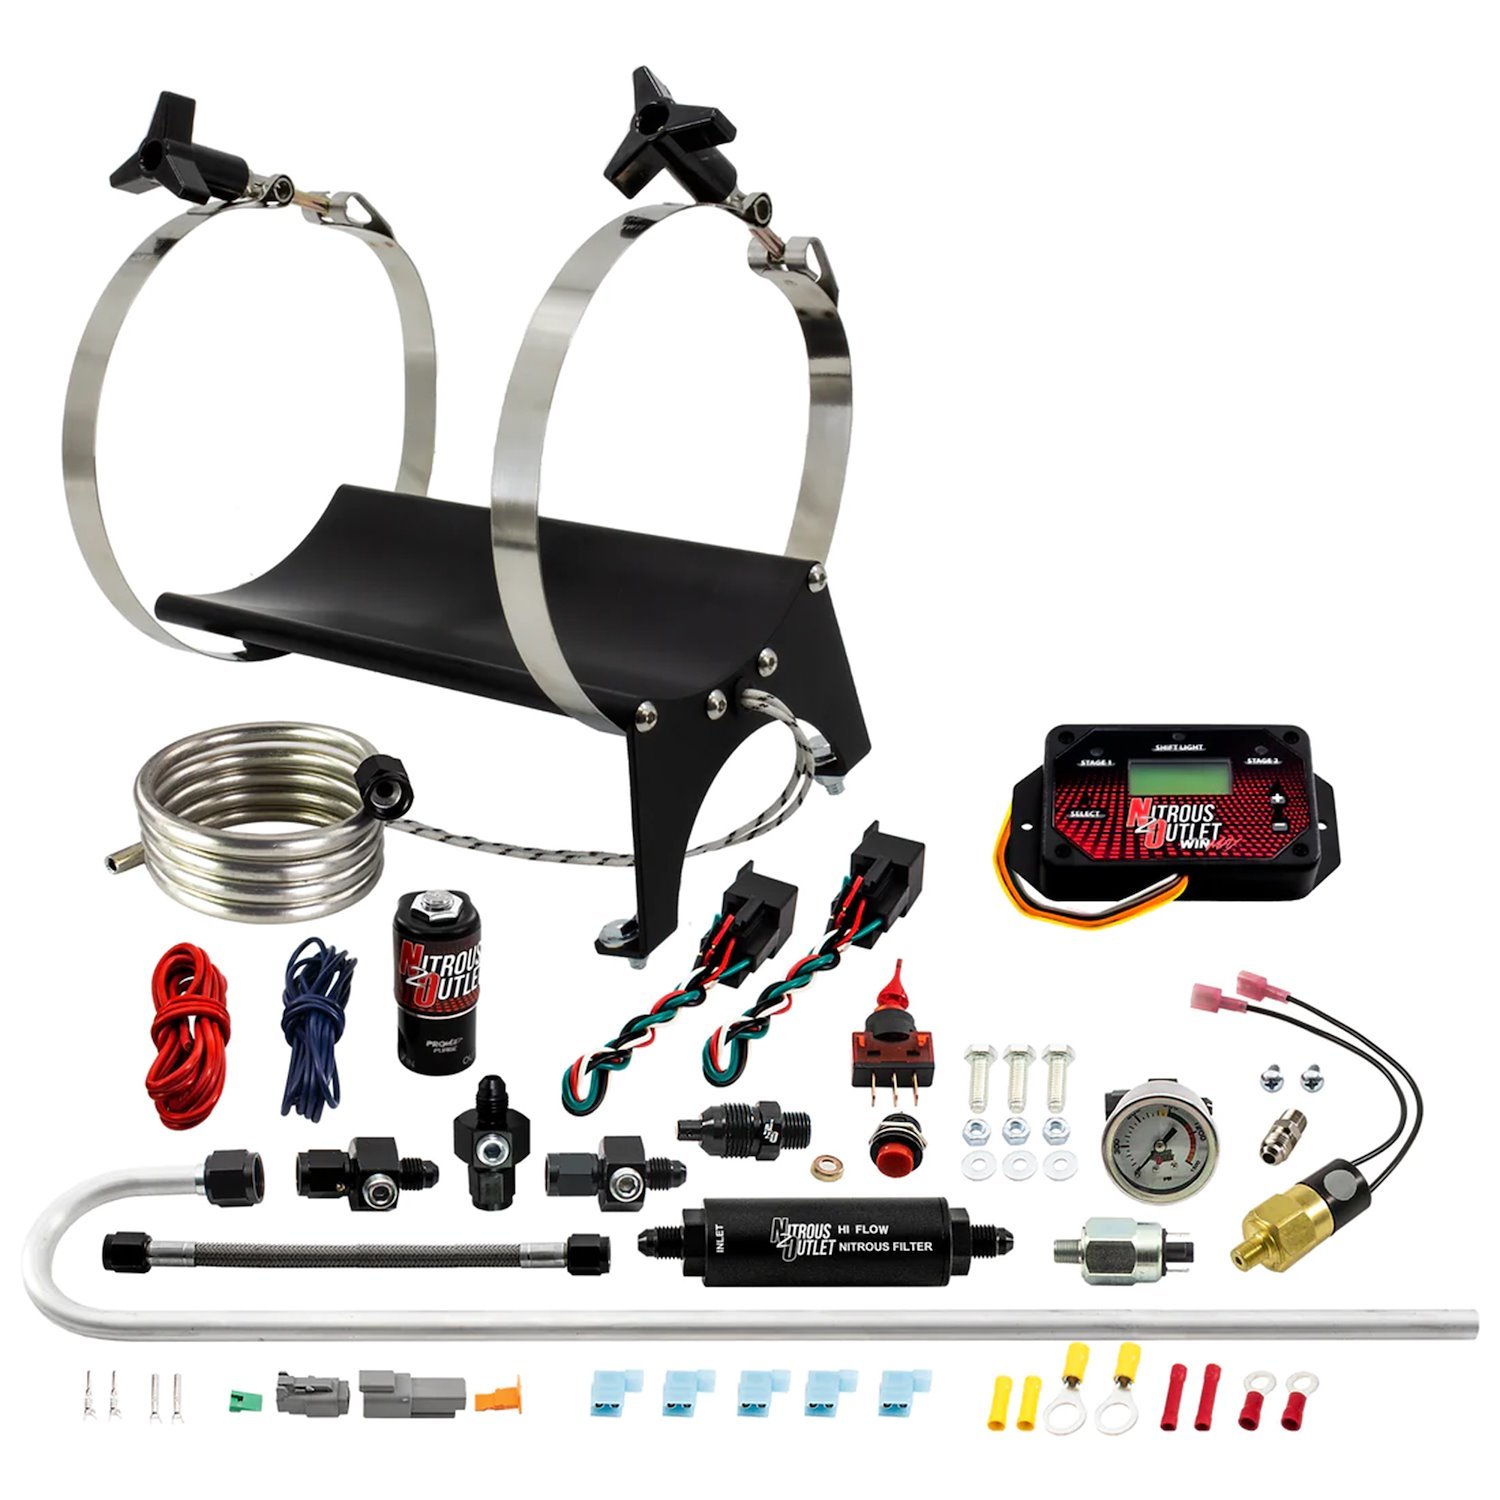 00-69002-L6 Ultimate Nitrous Accessory Package, WinMax, Low Fuel Pressure/6AN